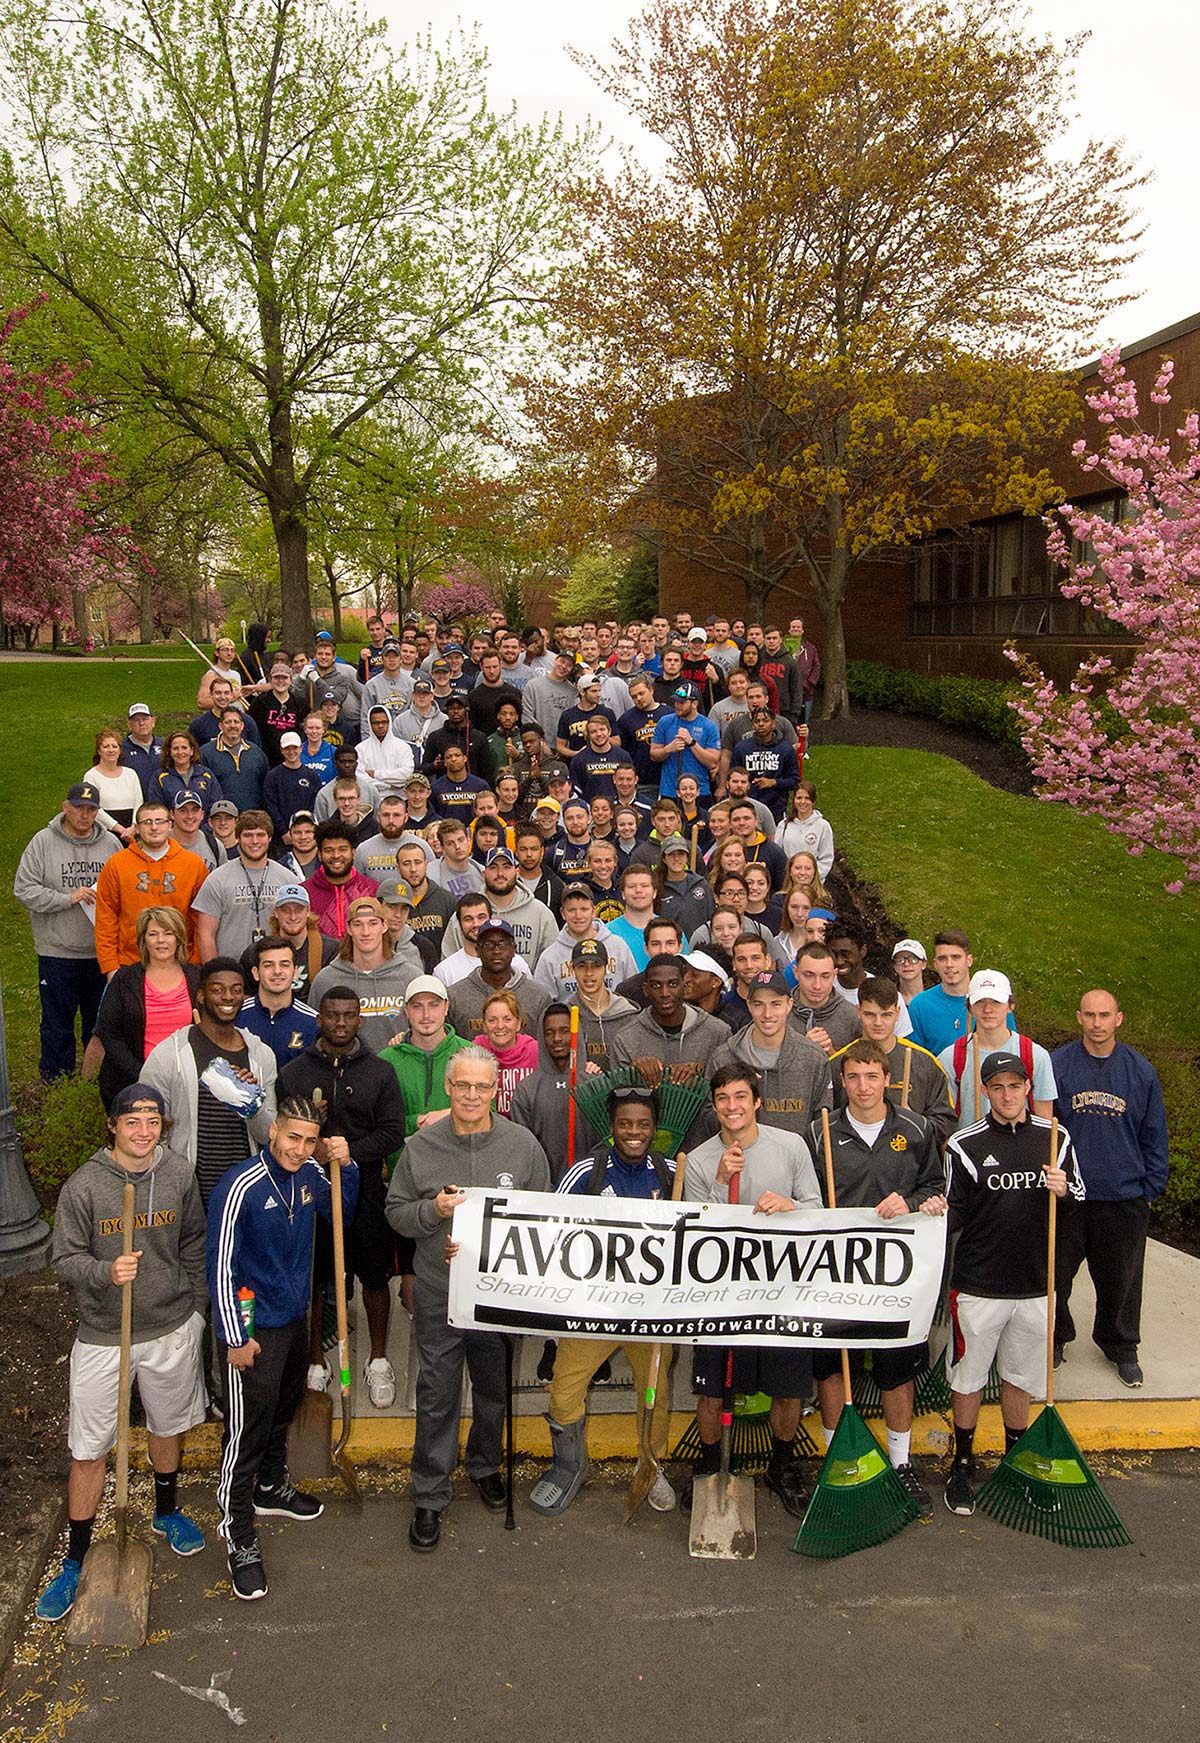 Lycoming athletes with Favors Forward banner